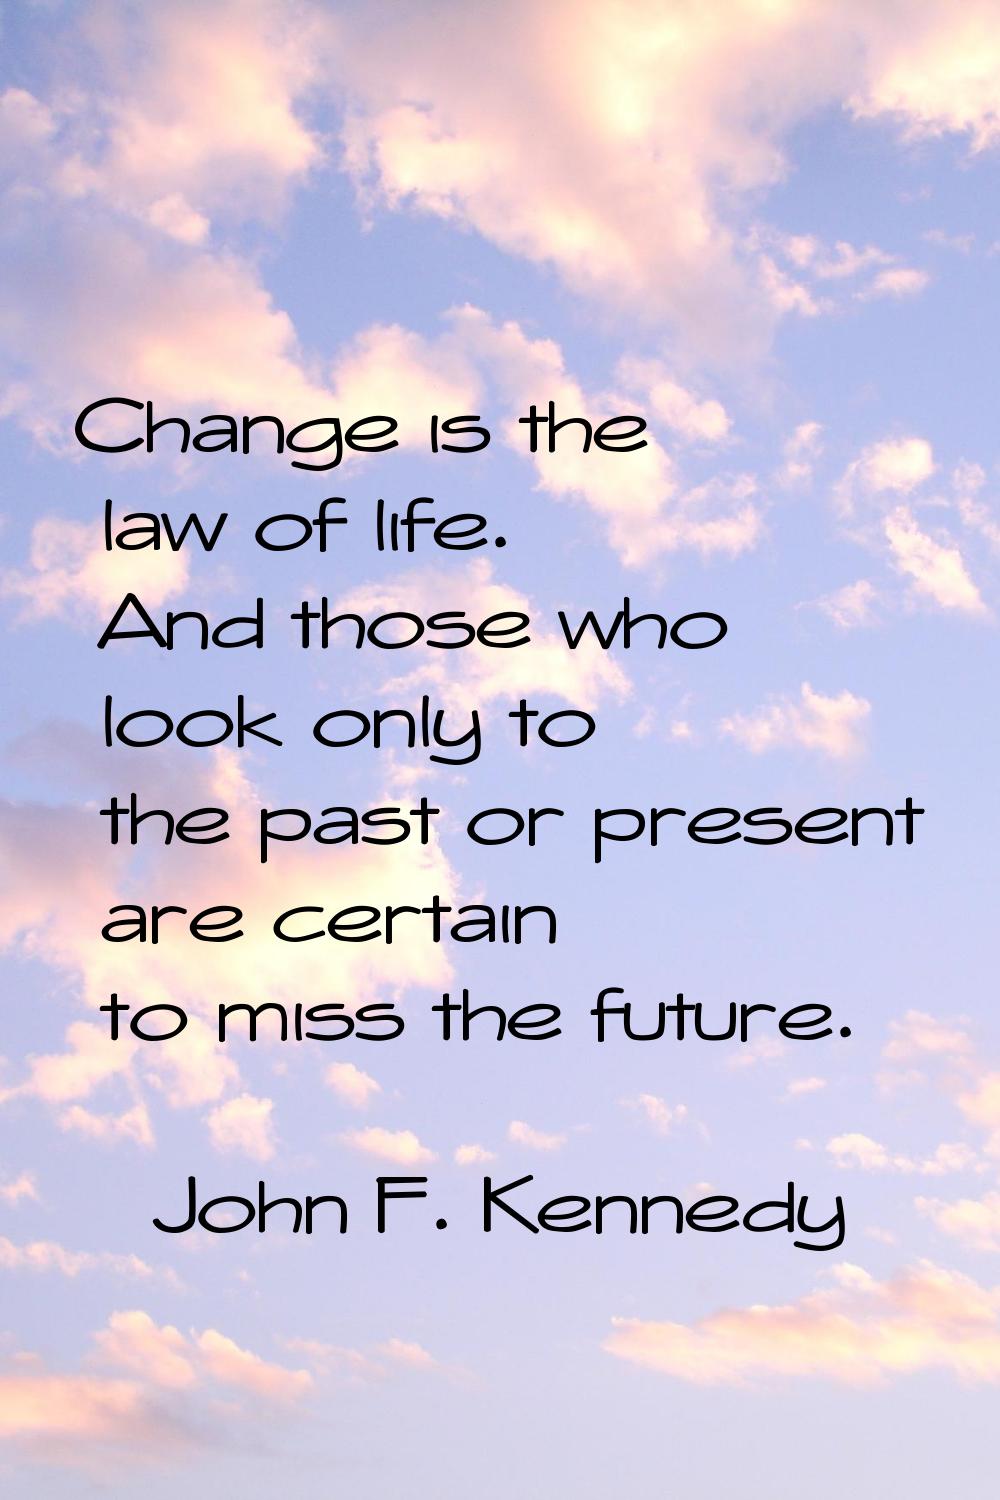 Change is the law of life. And those who look only to the past or present are certain to miss the f